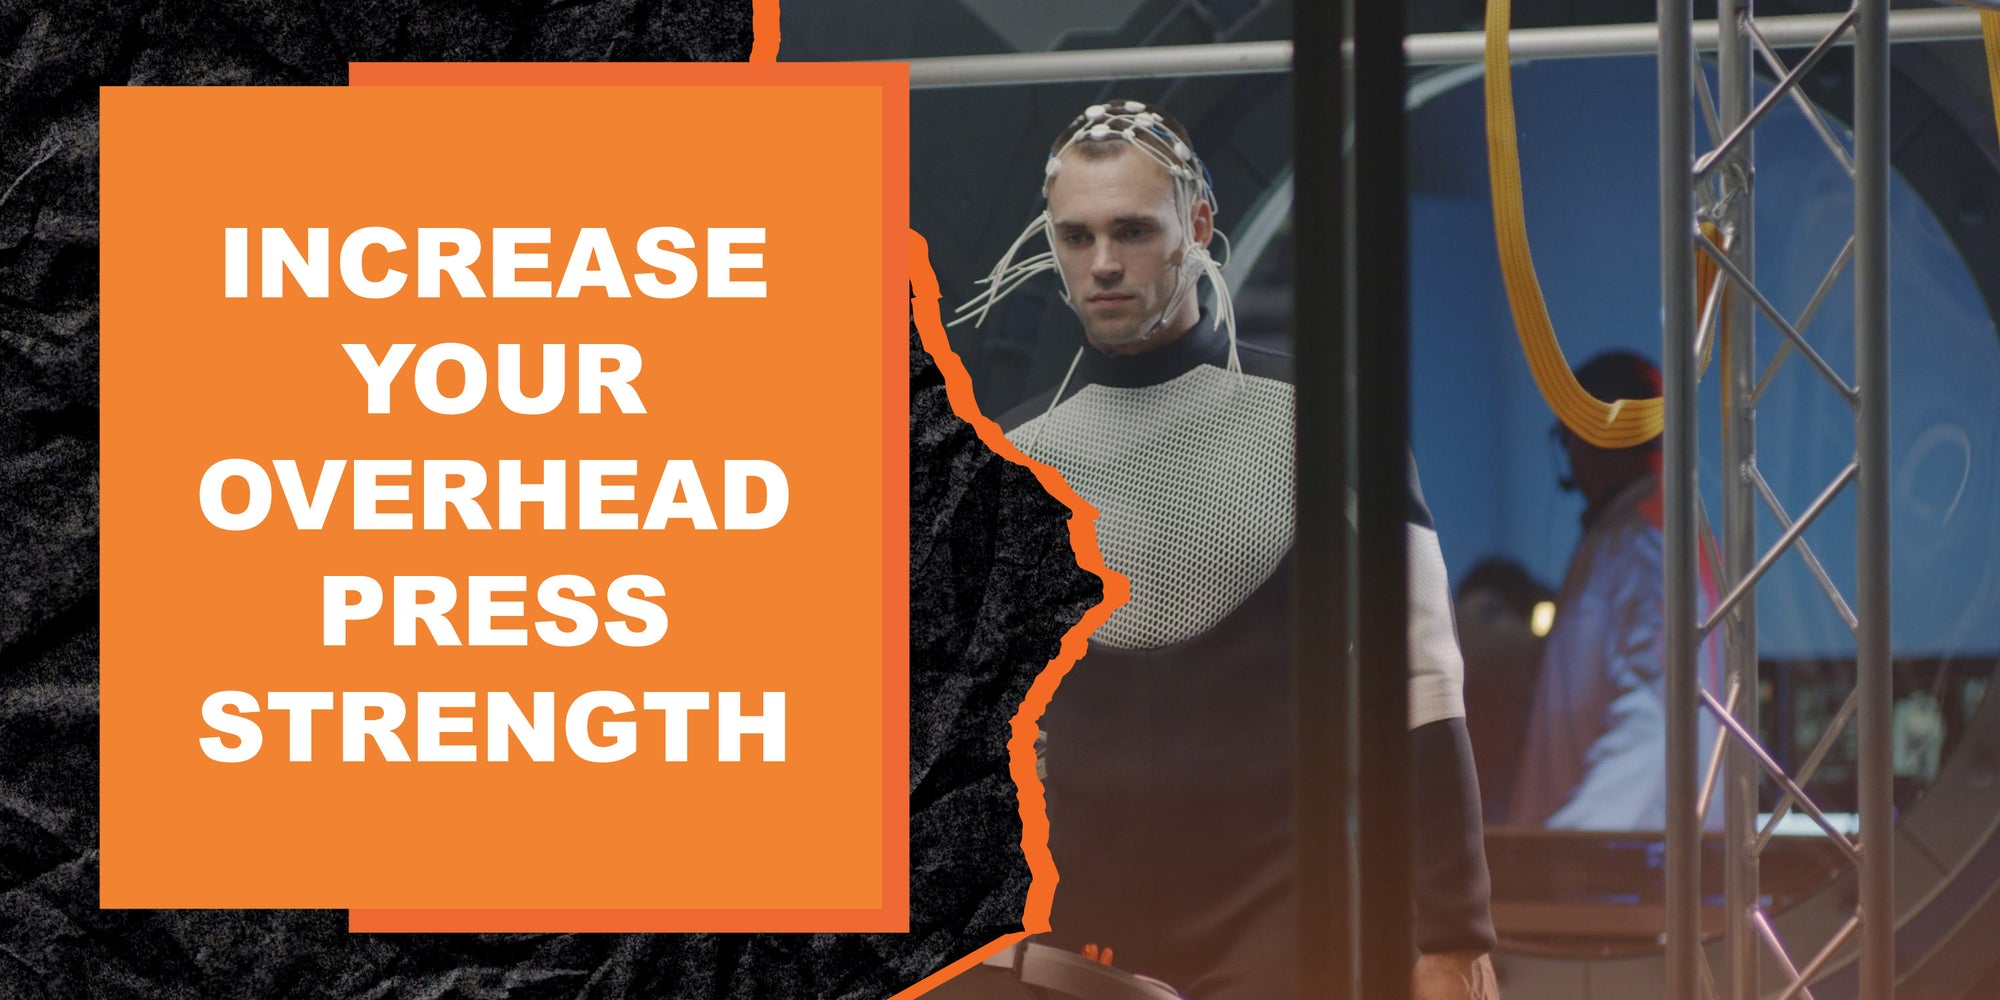 Innovative Ways to Increase Your Overhead Press Strength